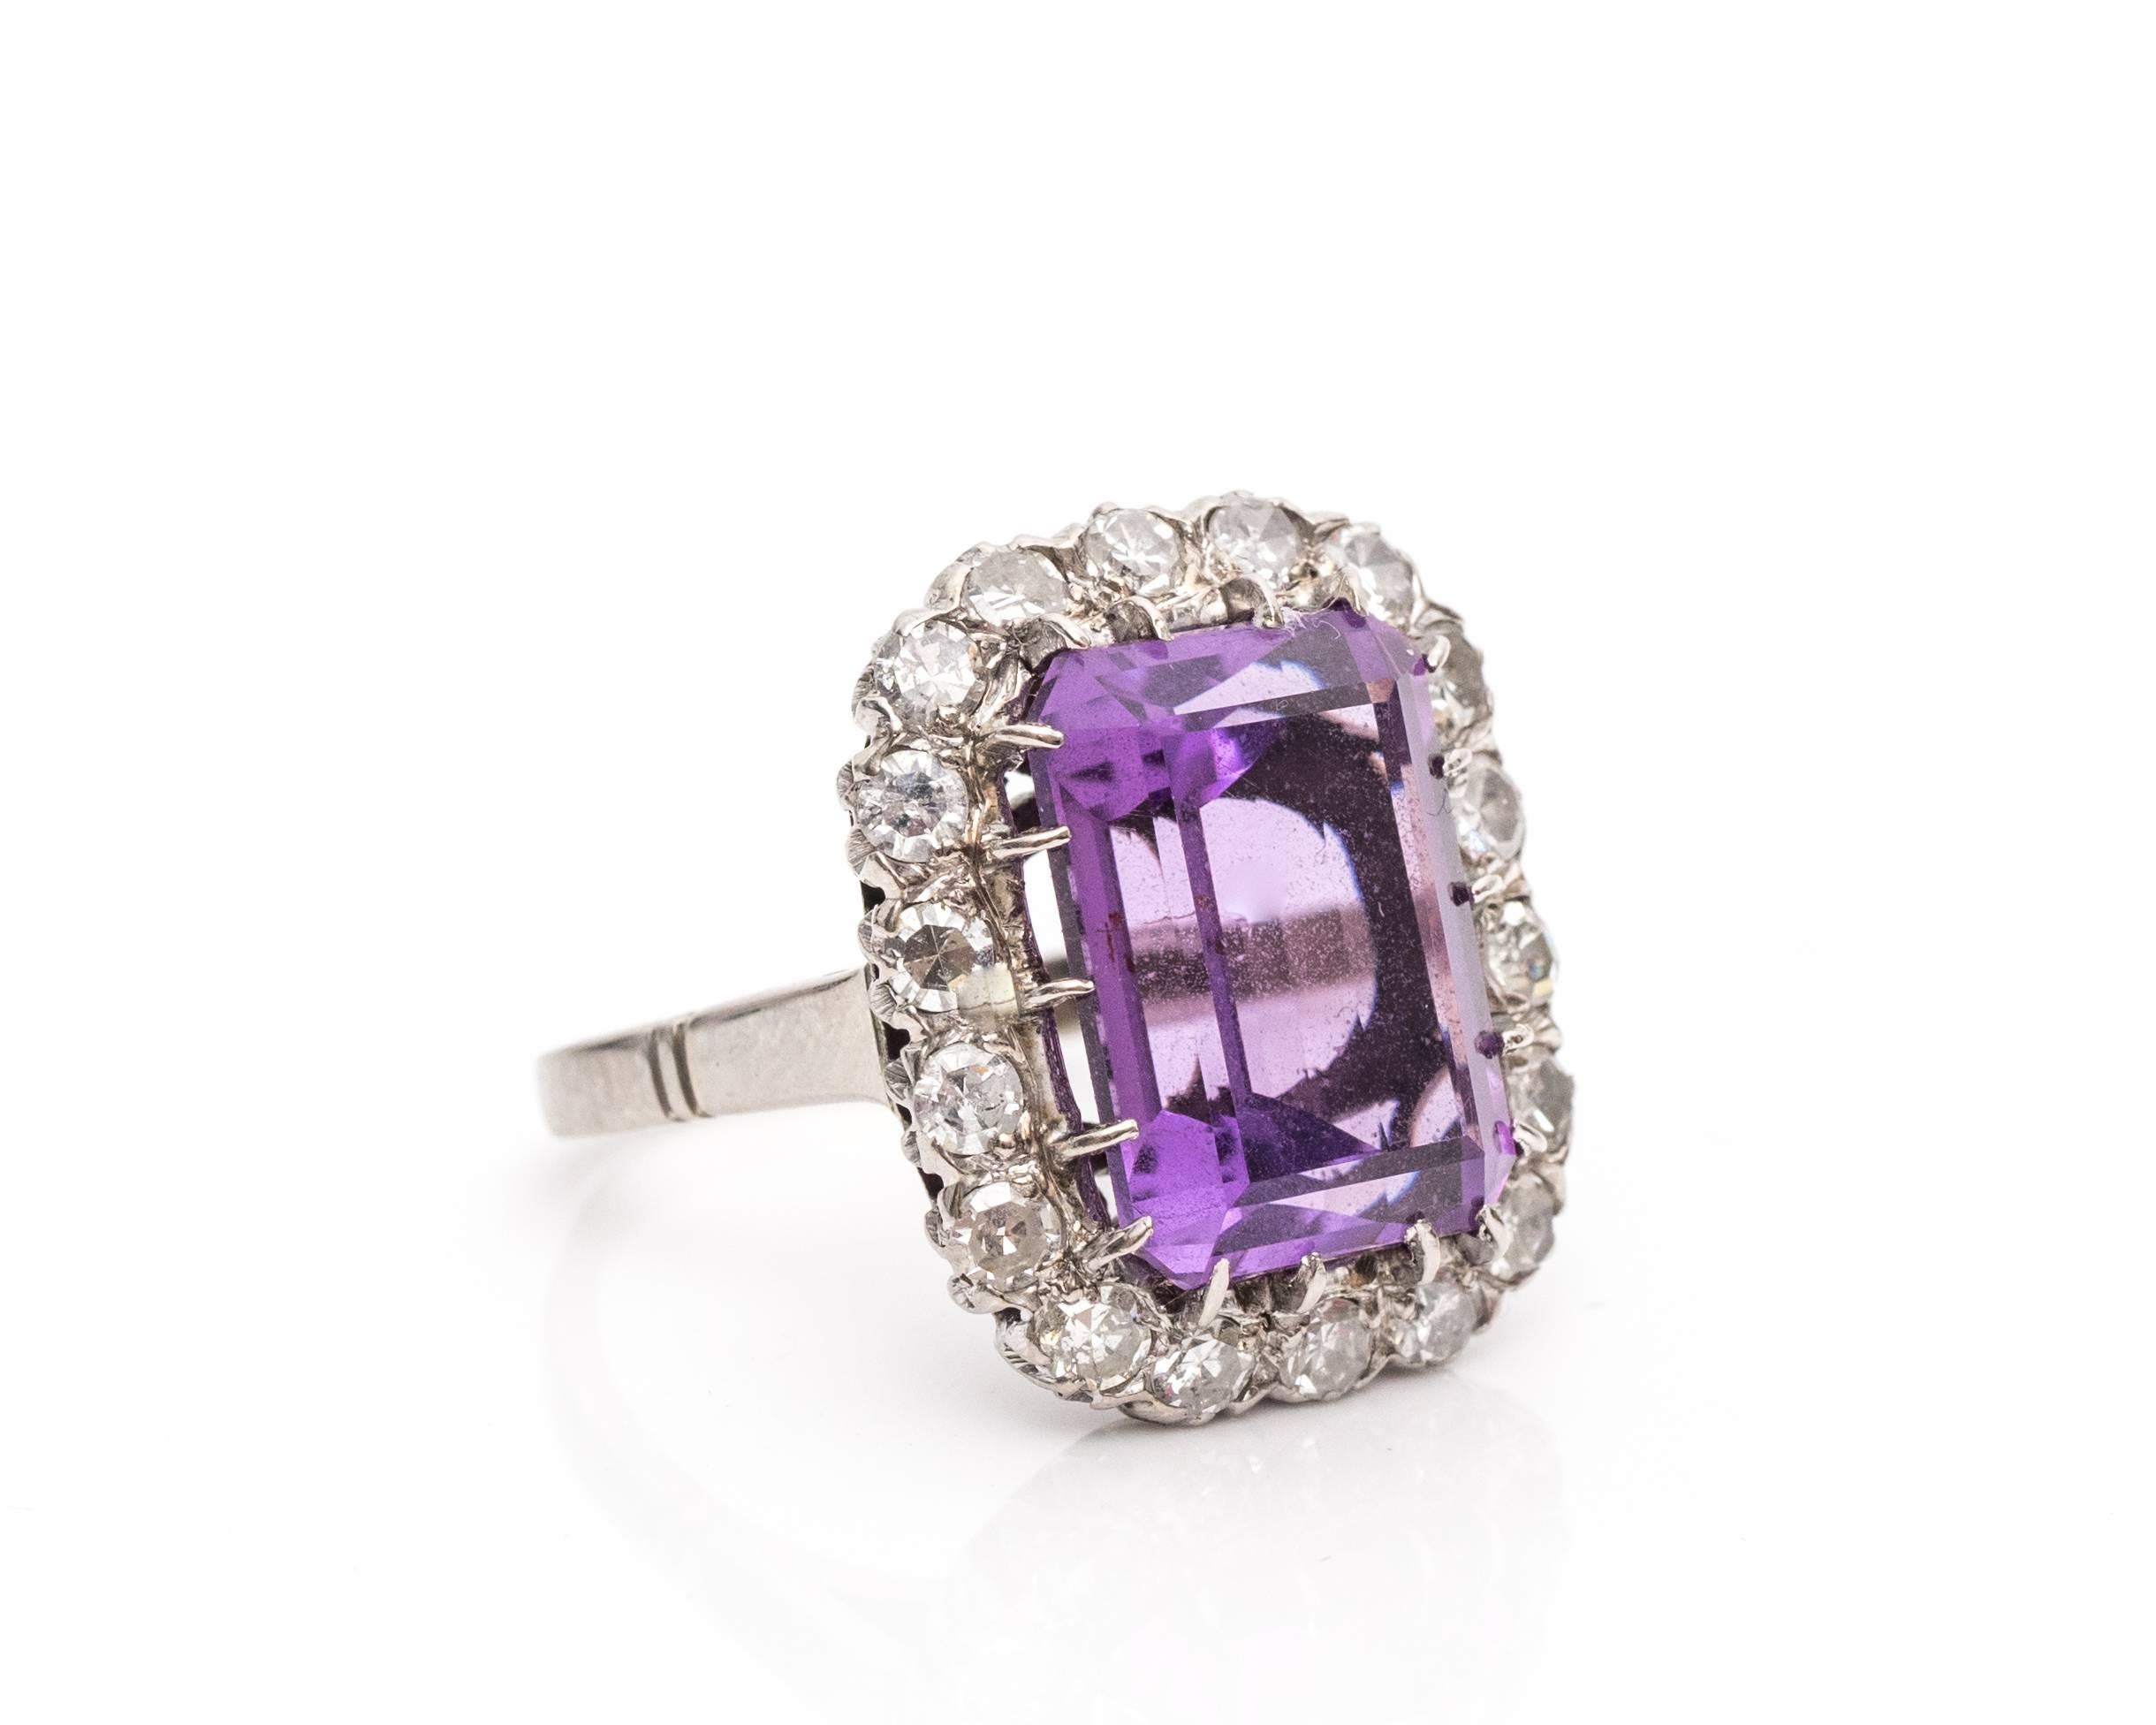 A drop dead gorgeous ring! This piece embodies the 1940s due to the larger-than-life gemstones and design. This is most definitely a statement piece!

The center features an ornate amethyst as a royal purple color, emerald shape, and total of 5